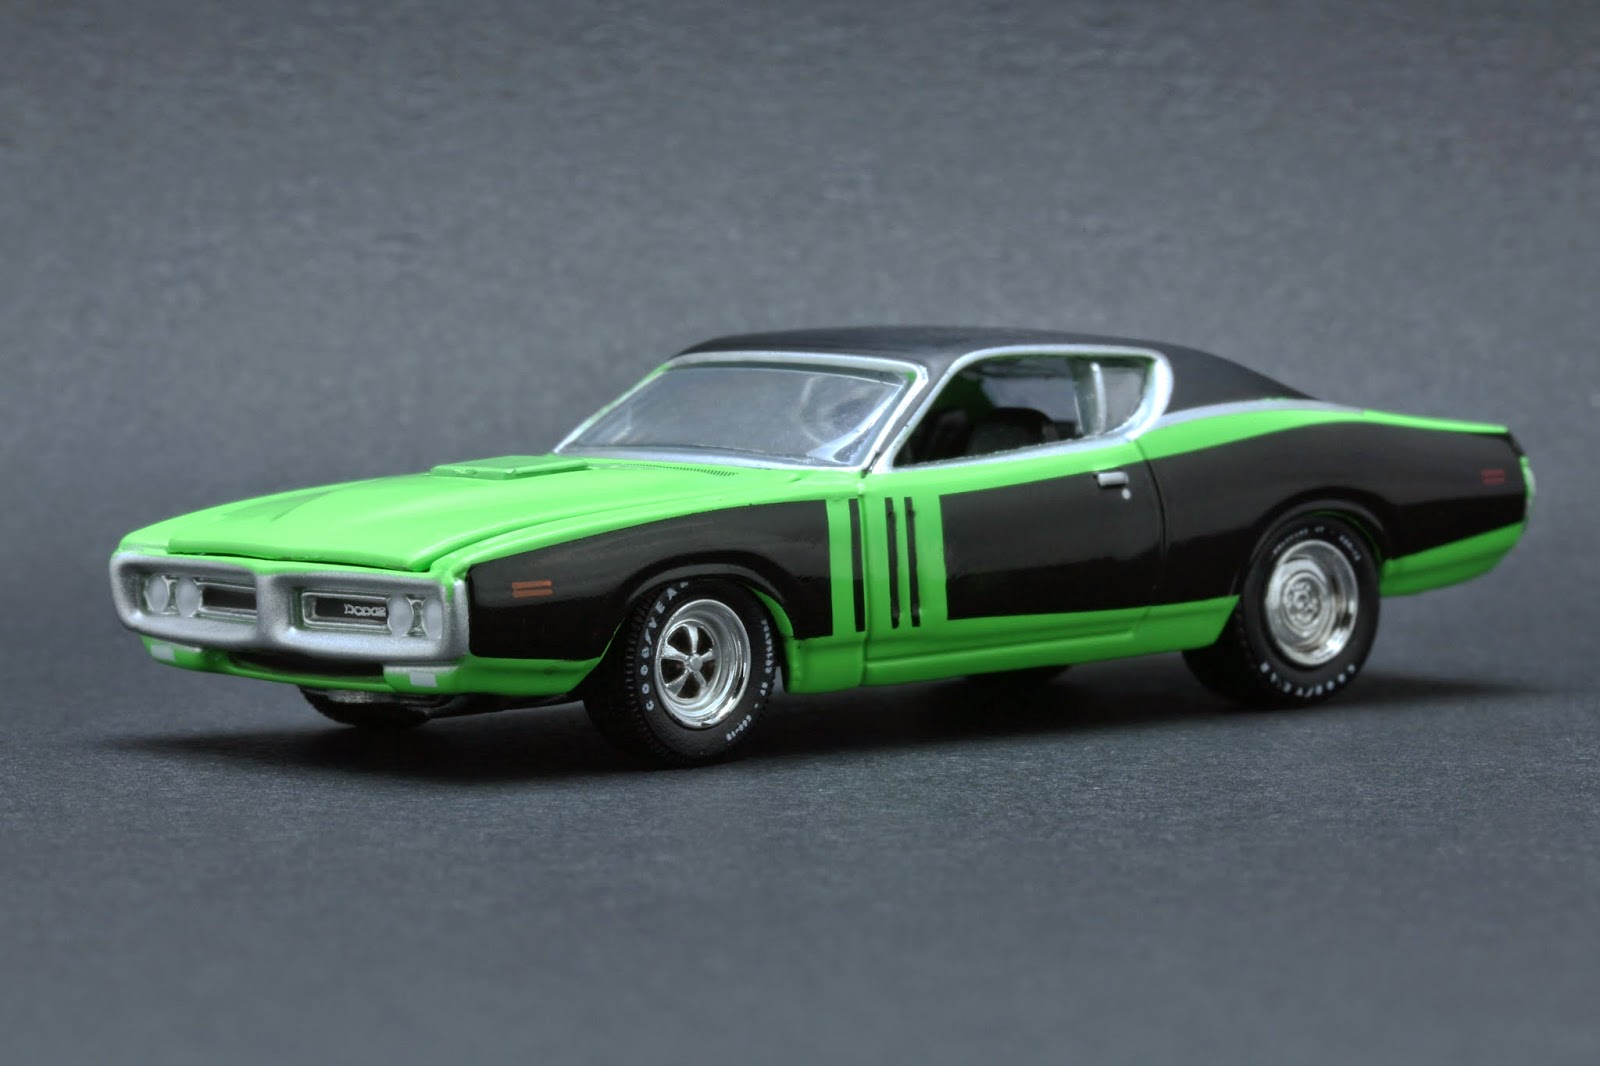 Diecast Hobbist: 1971 Dodge Charger - Gone In 60 Seconds (1974 and 2000)